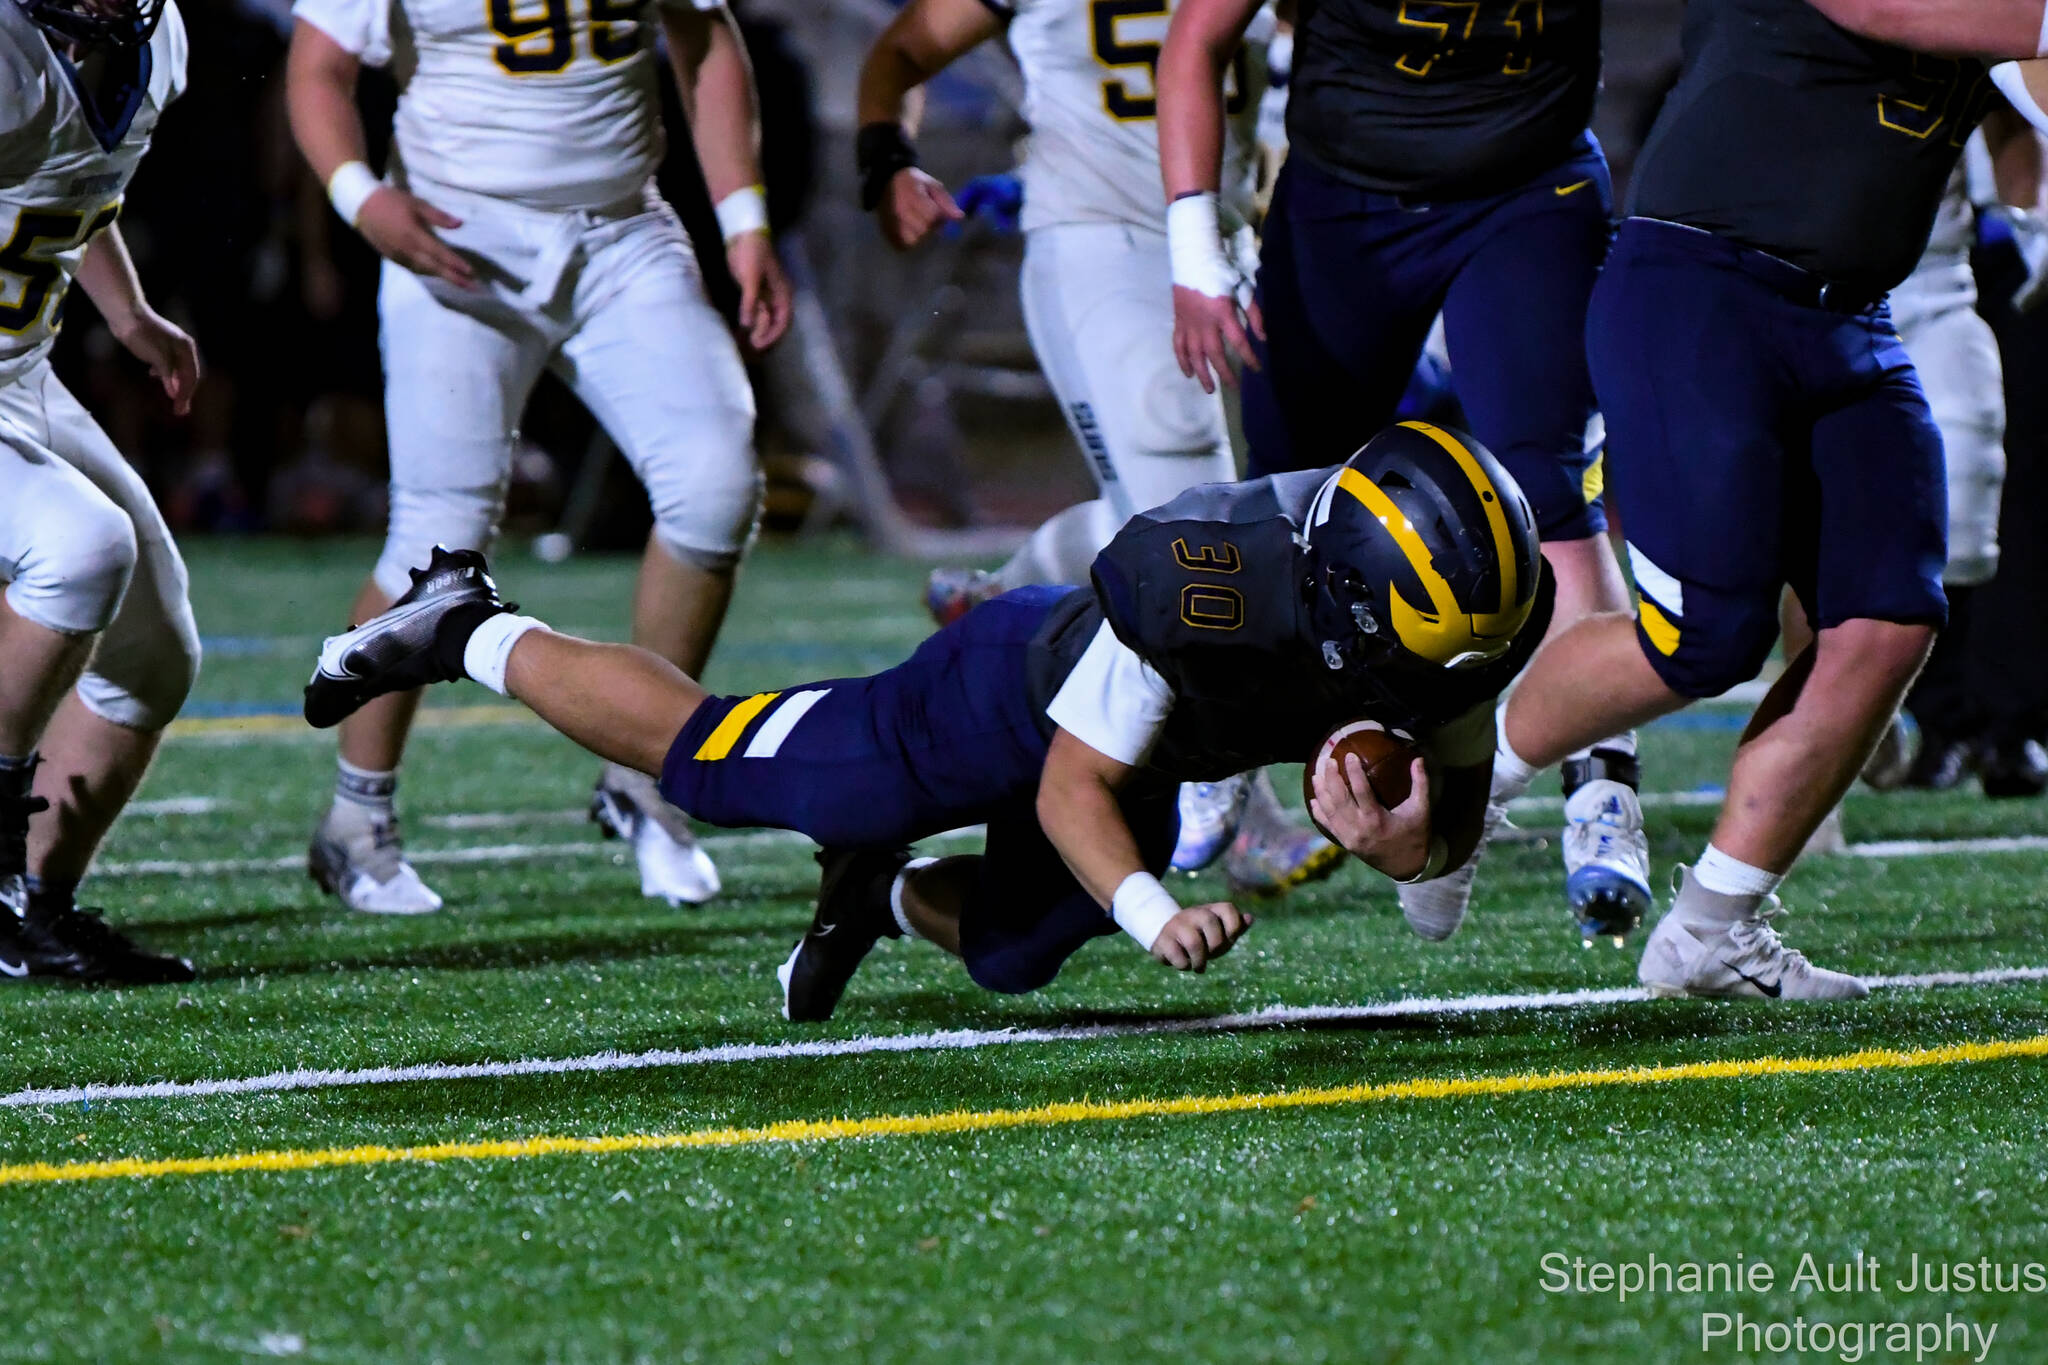 Bellevue’s William Wang dives for a touchdown during the Wolverines’ 42-0 3A district home victory over Southridge on Nov. 5. No. 1-seeded Bellevue (10-0) will next host Lakes in a state matchup at 7 p.m. on Nov. 12. Photo courtesy of Stephanie Ault Justus